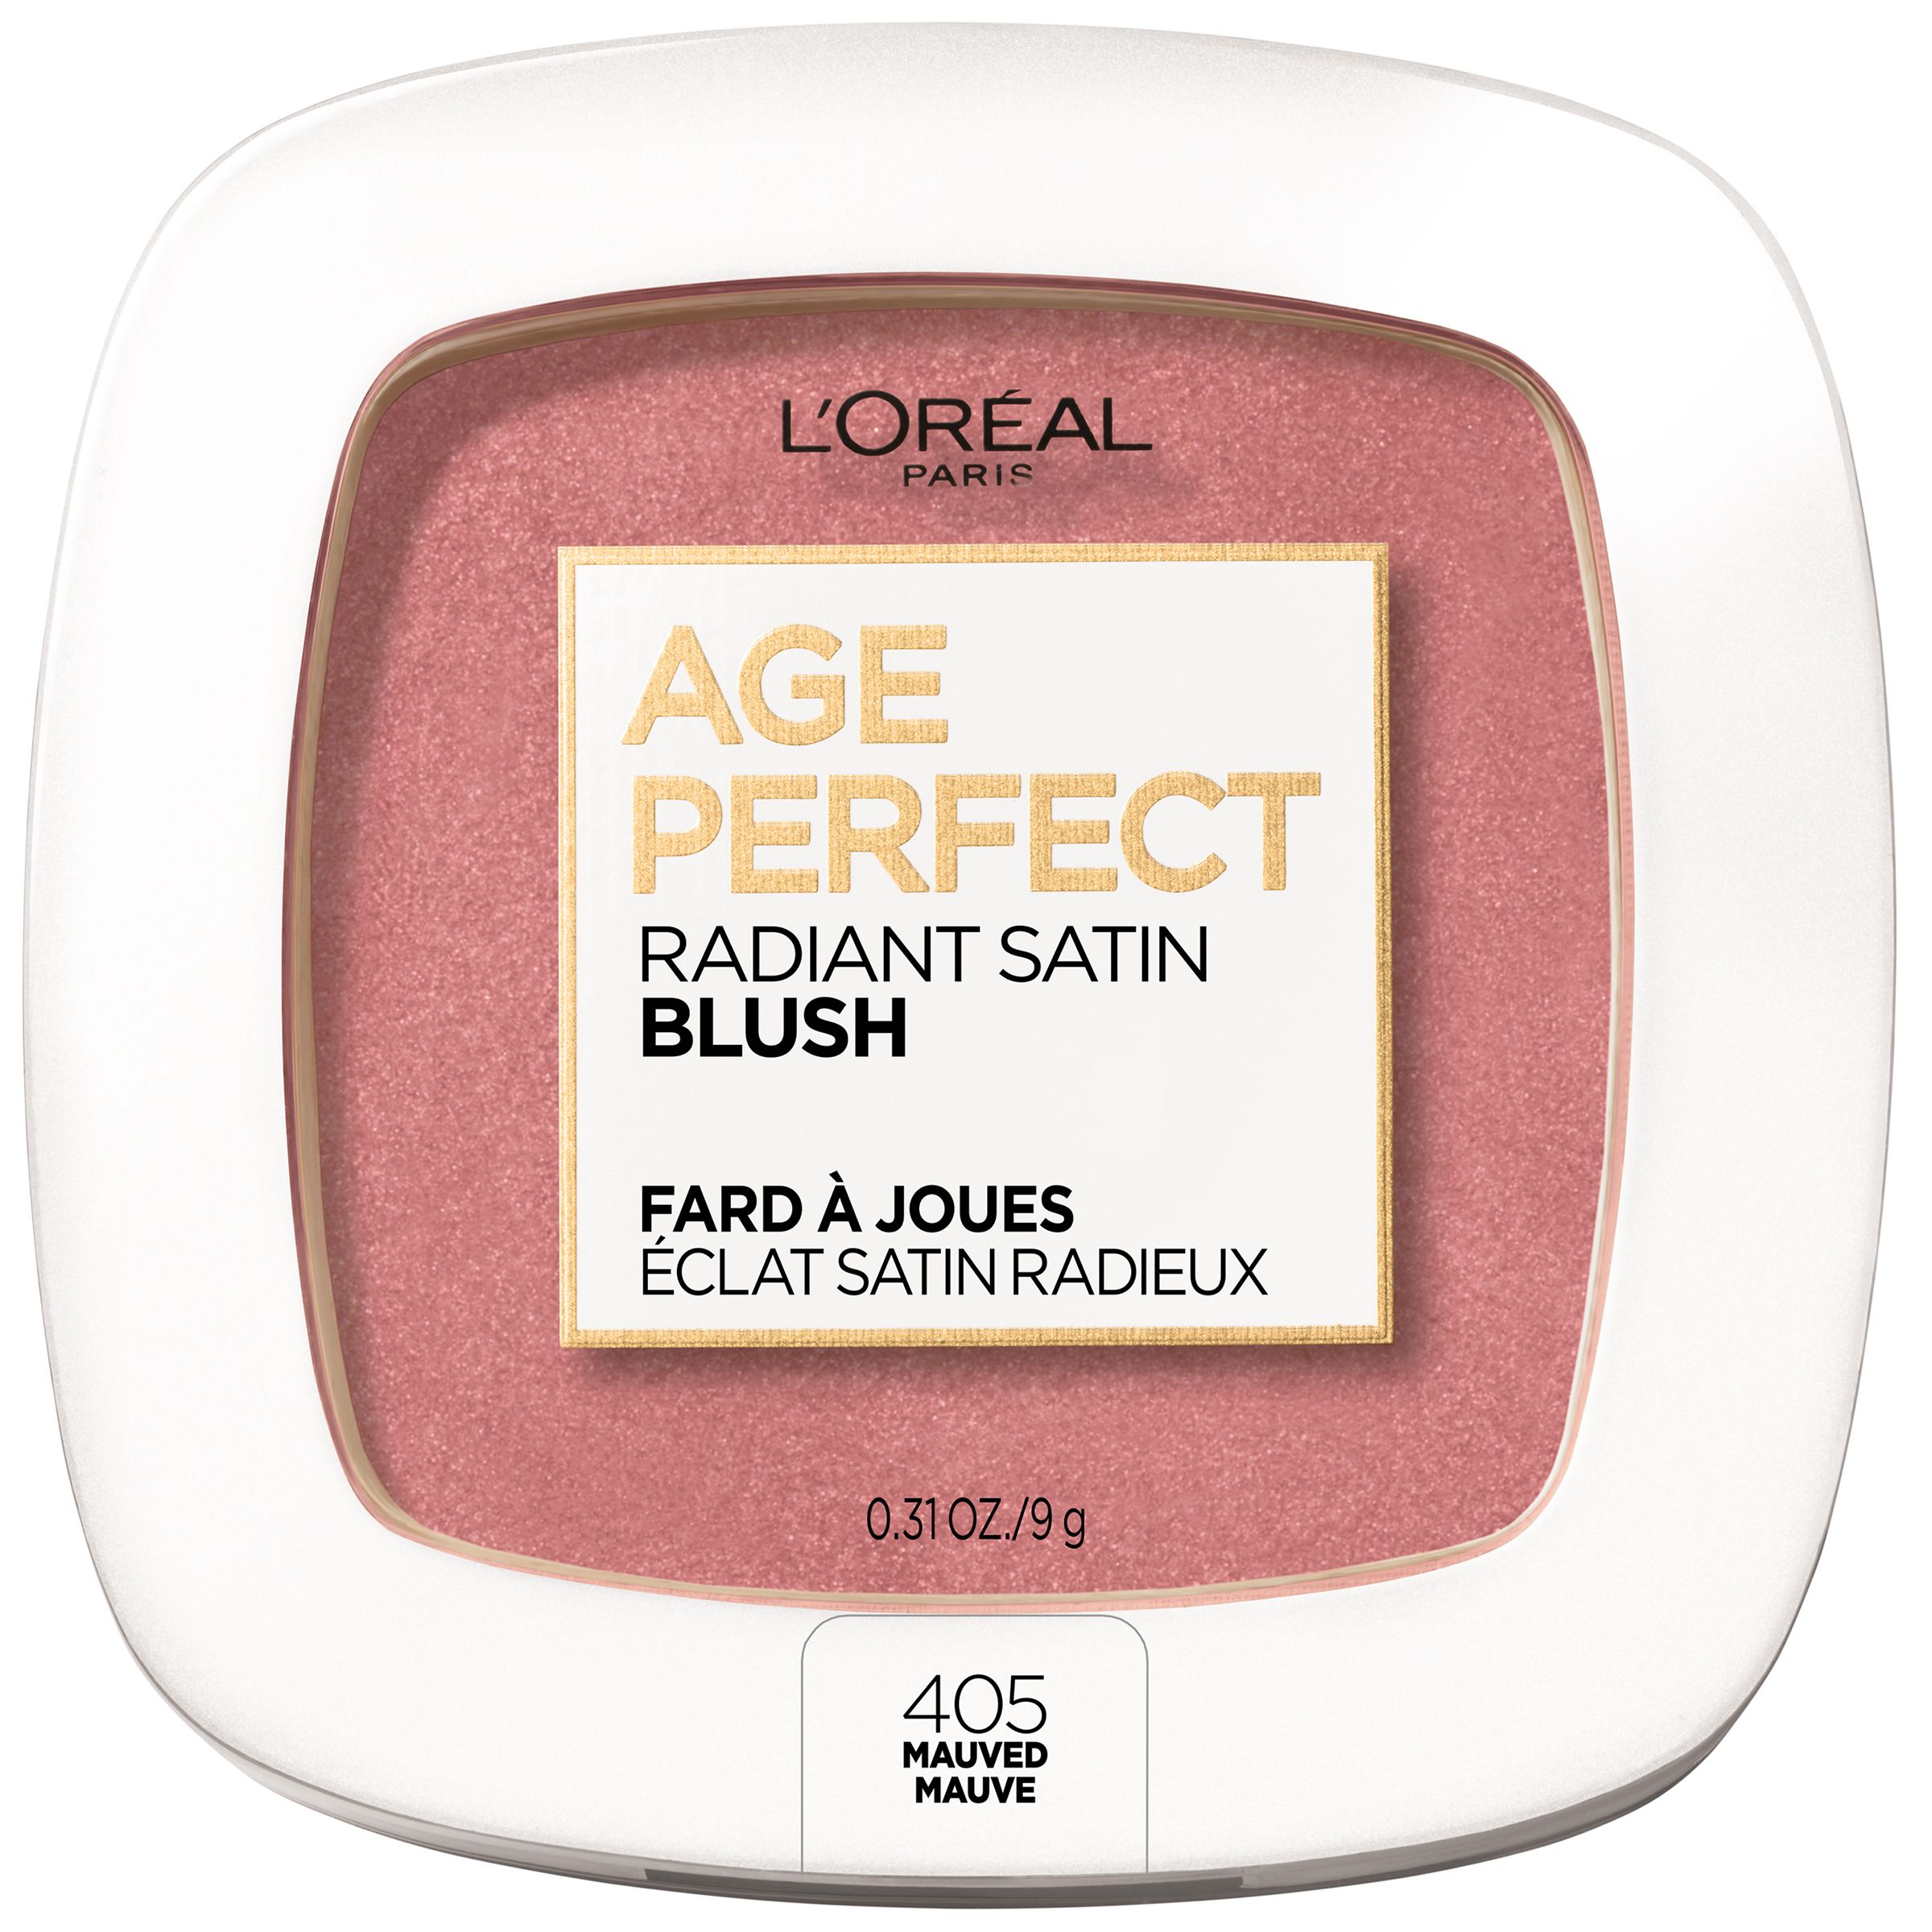 Age Perfect Radiant Satin Blush with Camellia Oil